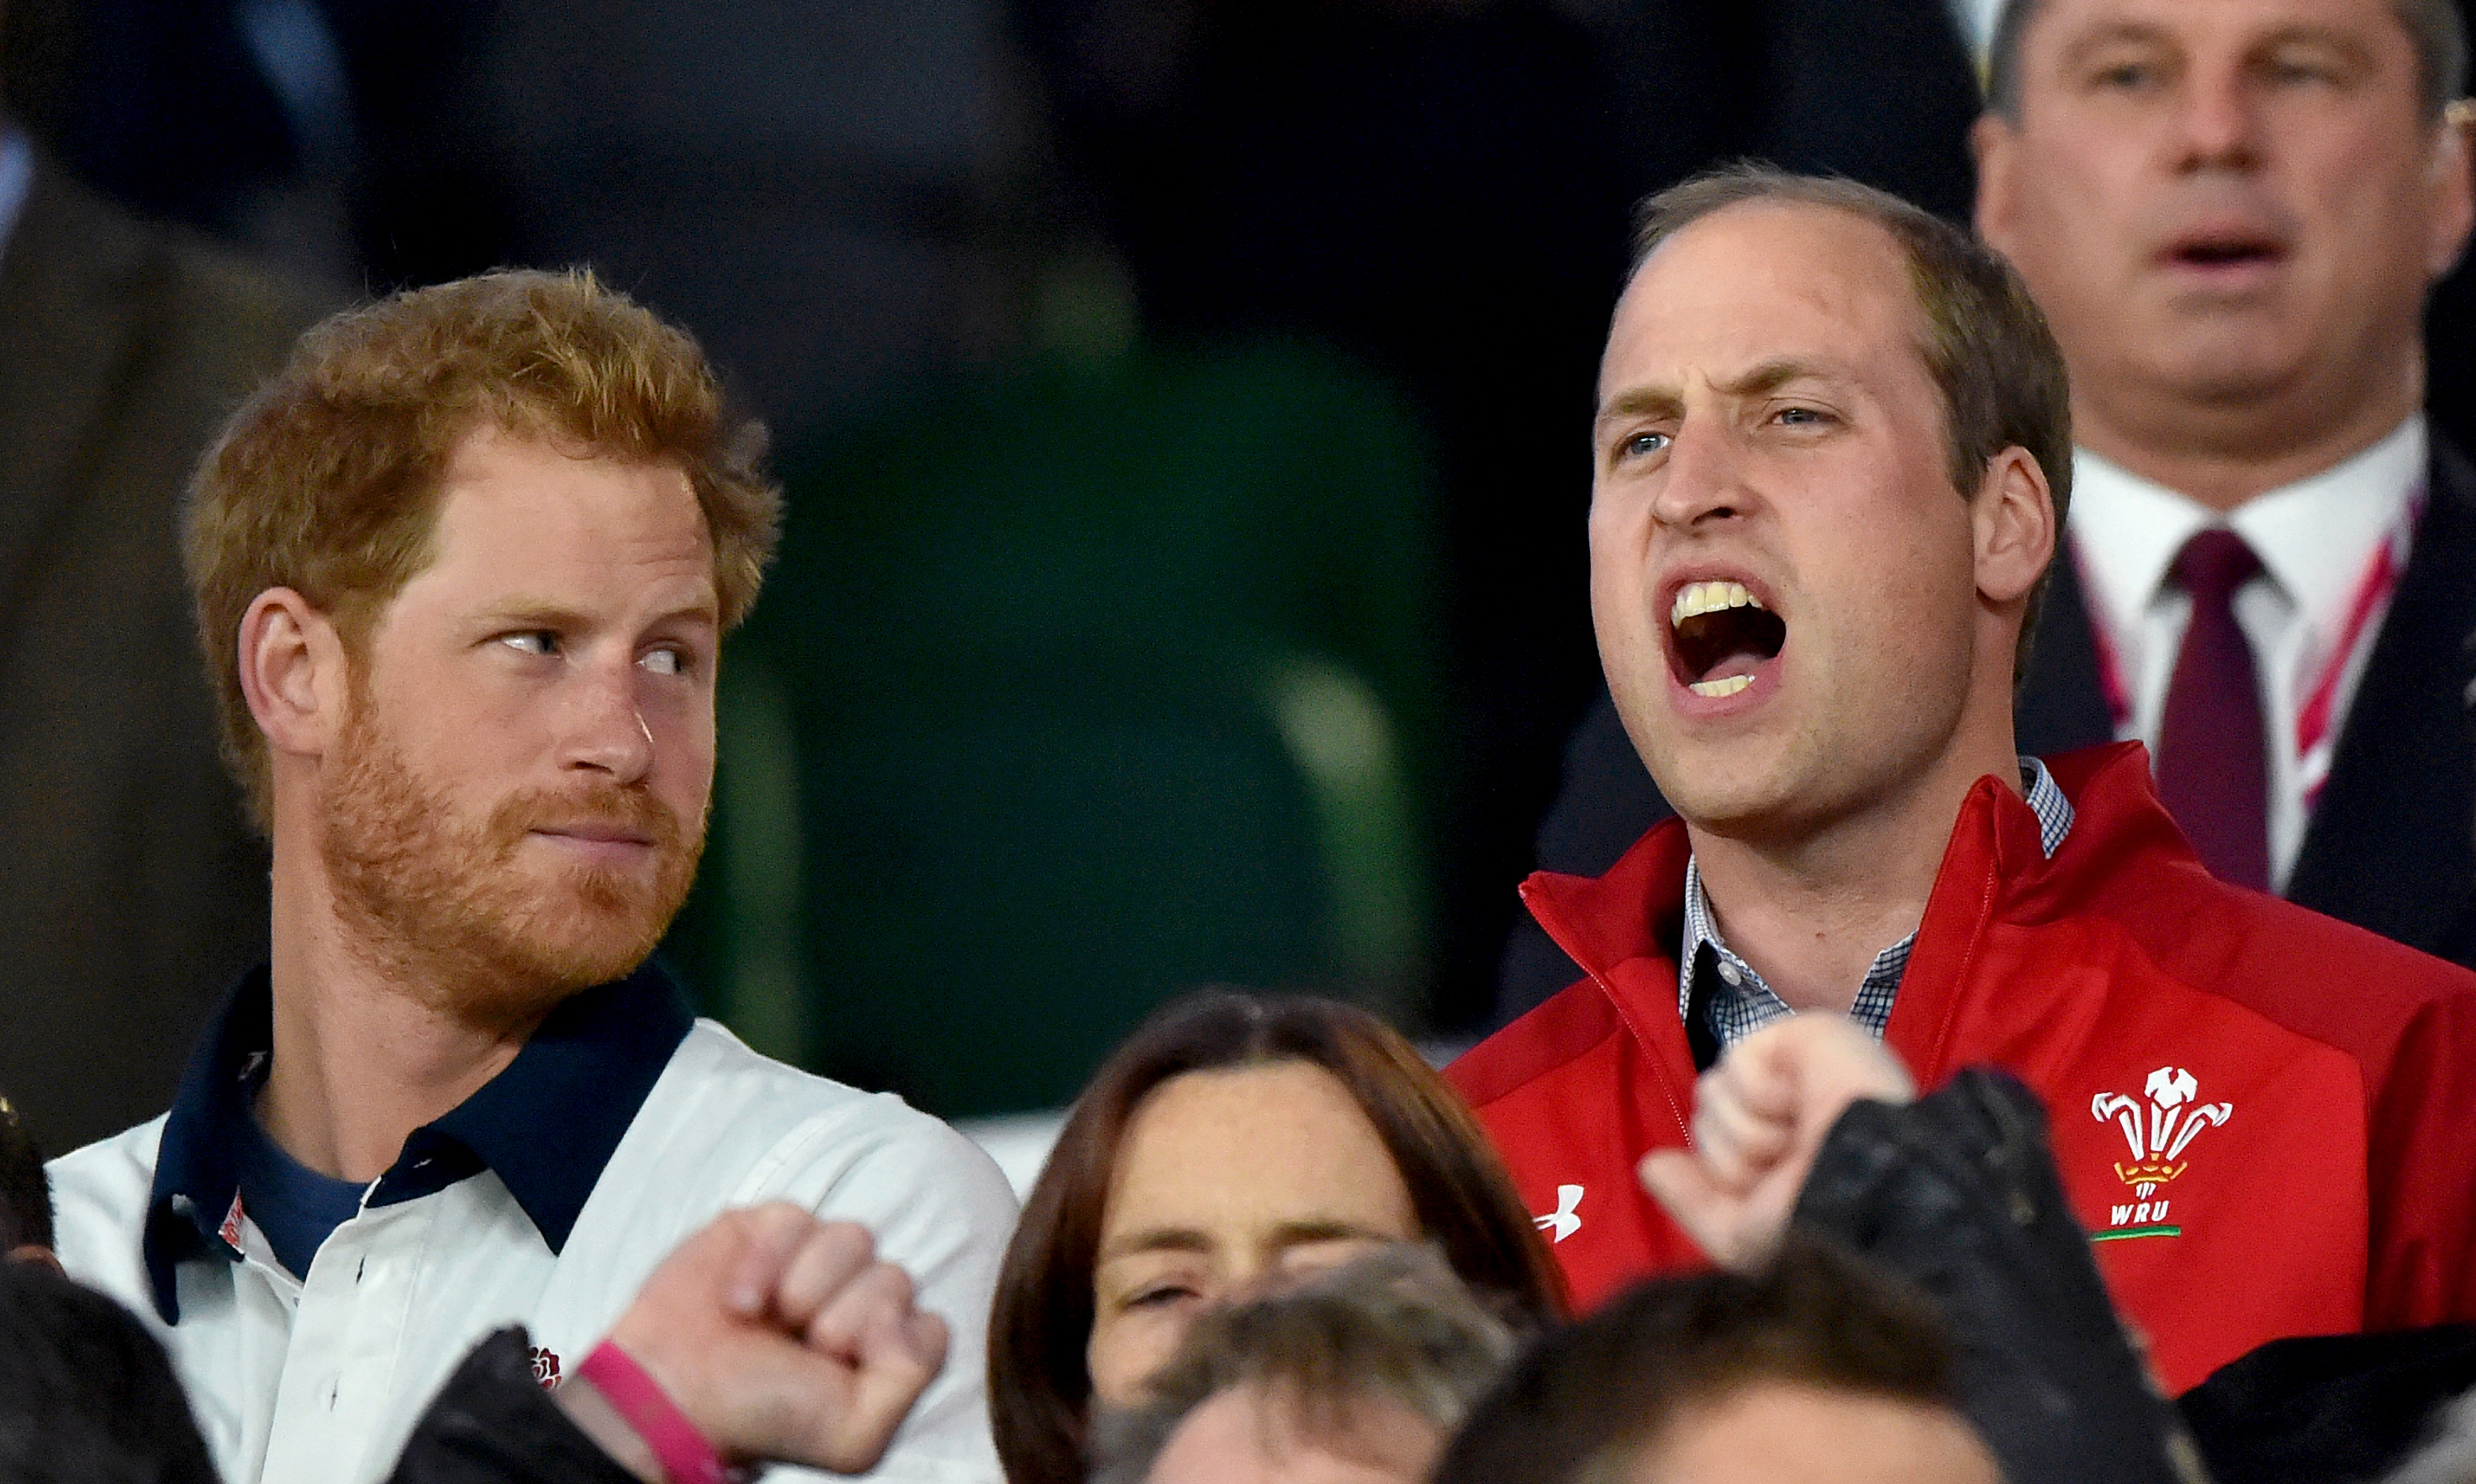 Prince Harry and Prince William, Duke of Cambridge attend the England v Wales match during the Rugby World Cup 2015 on September 26, 2015 in London, England | Source: Getty Images